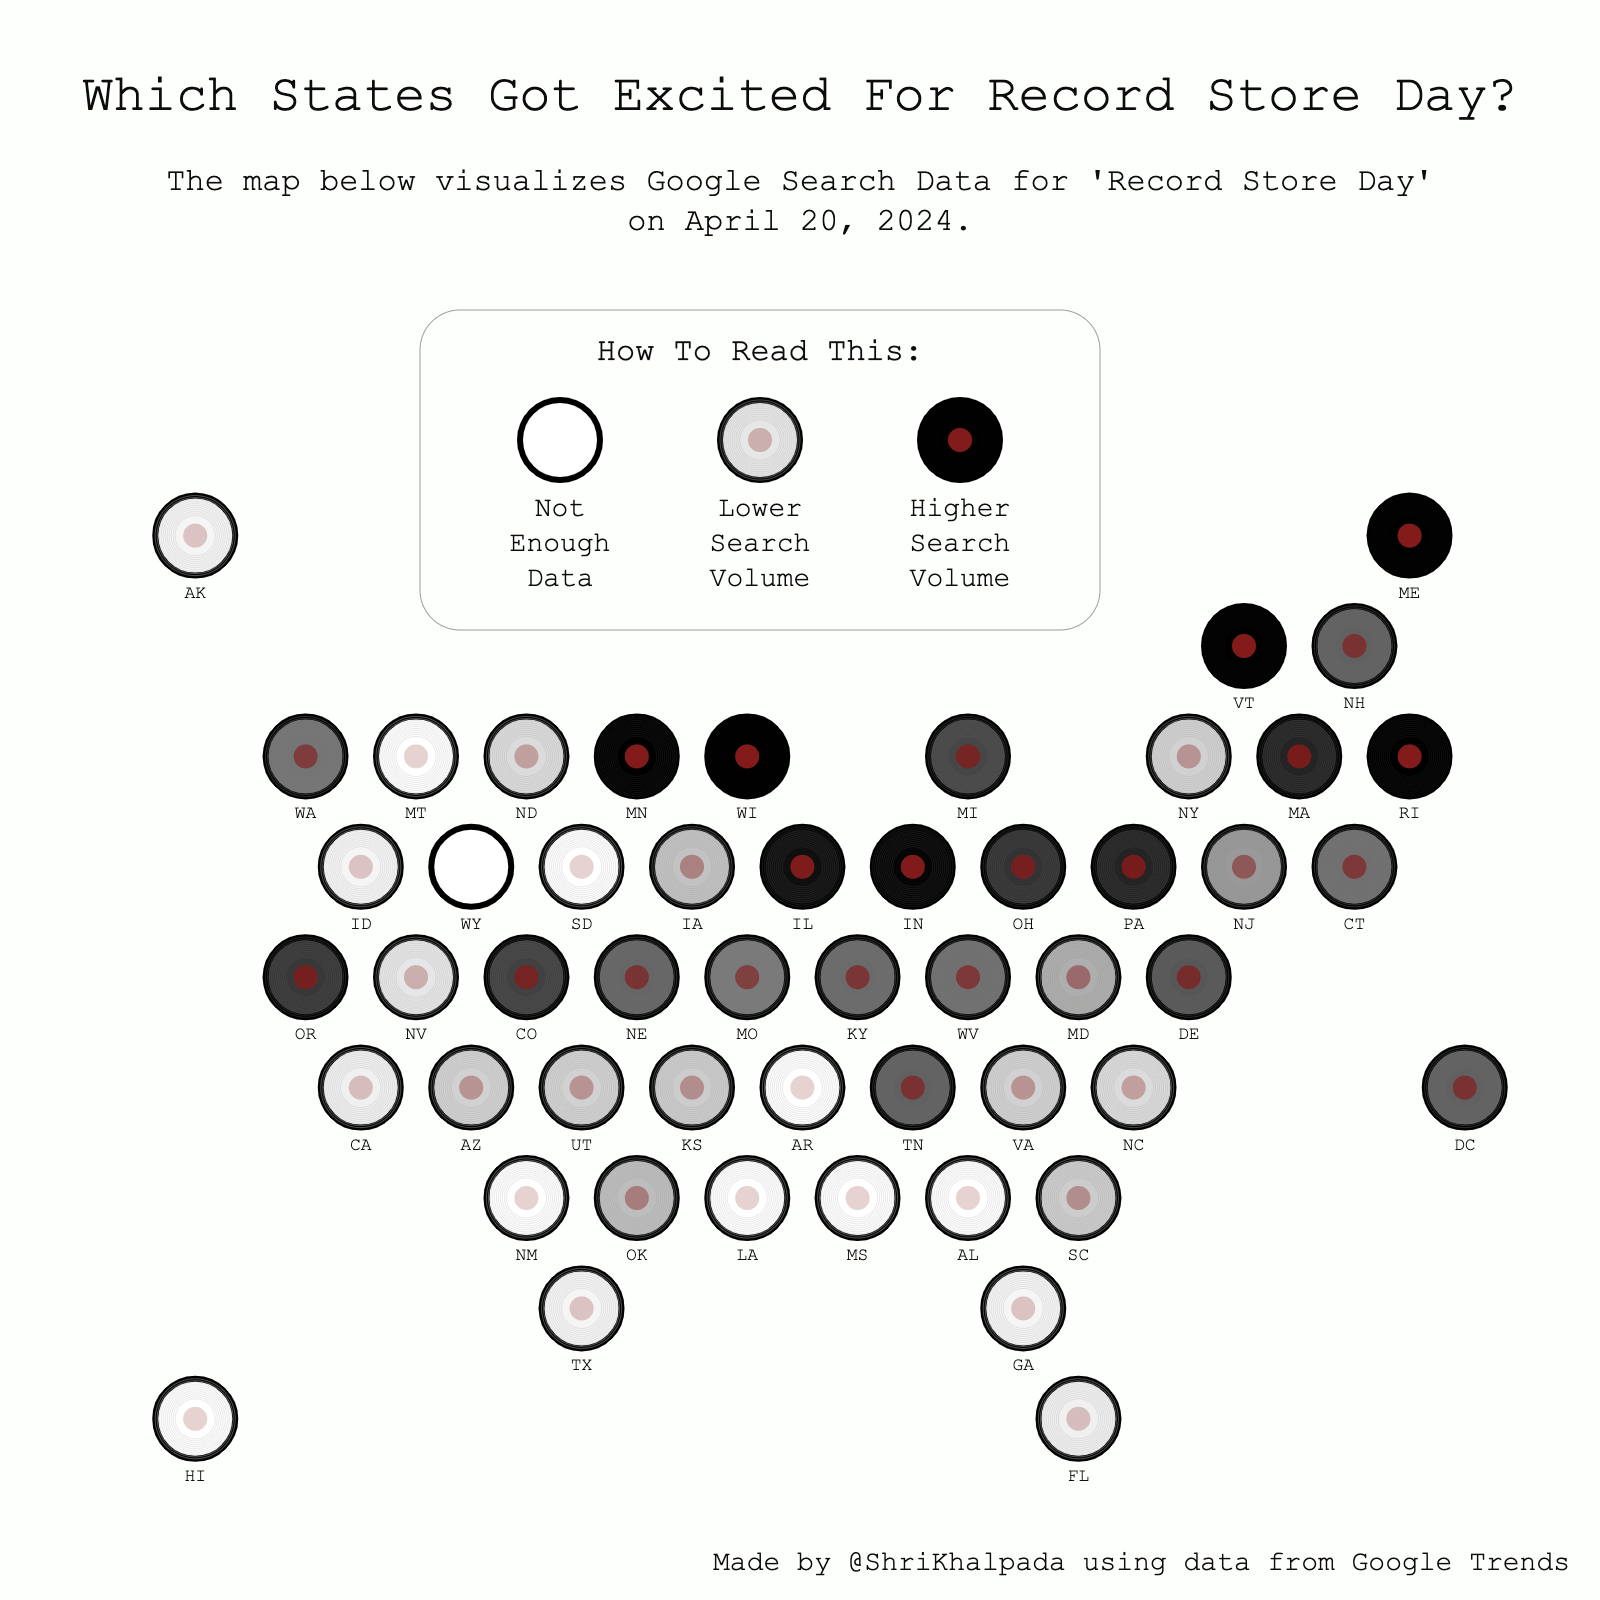 A map visualization titled "Which States Got Excited For Record Store Day?" using Google Search Data, with circles of varying shades indicating search volume by state.